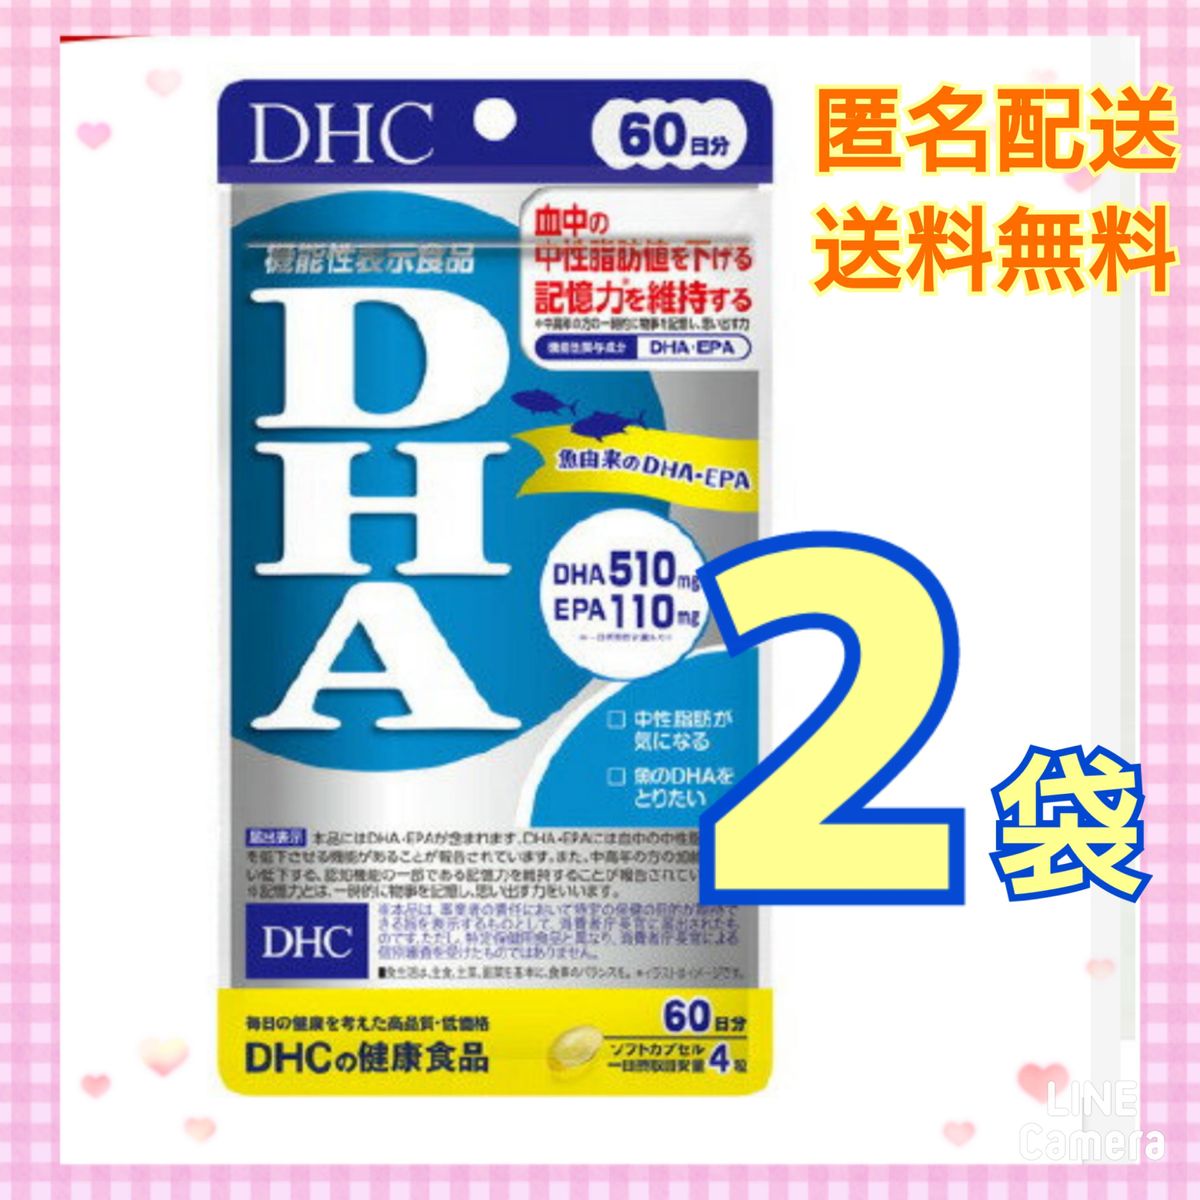 DHC  DHA 60日分　2袋